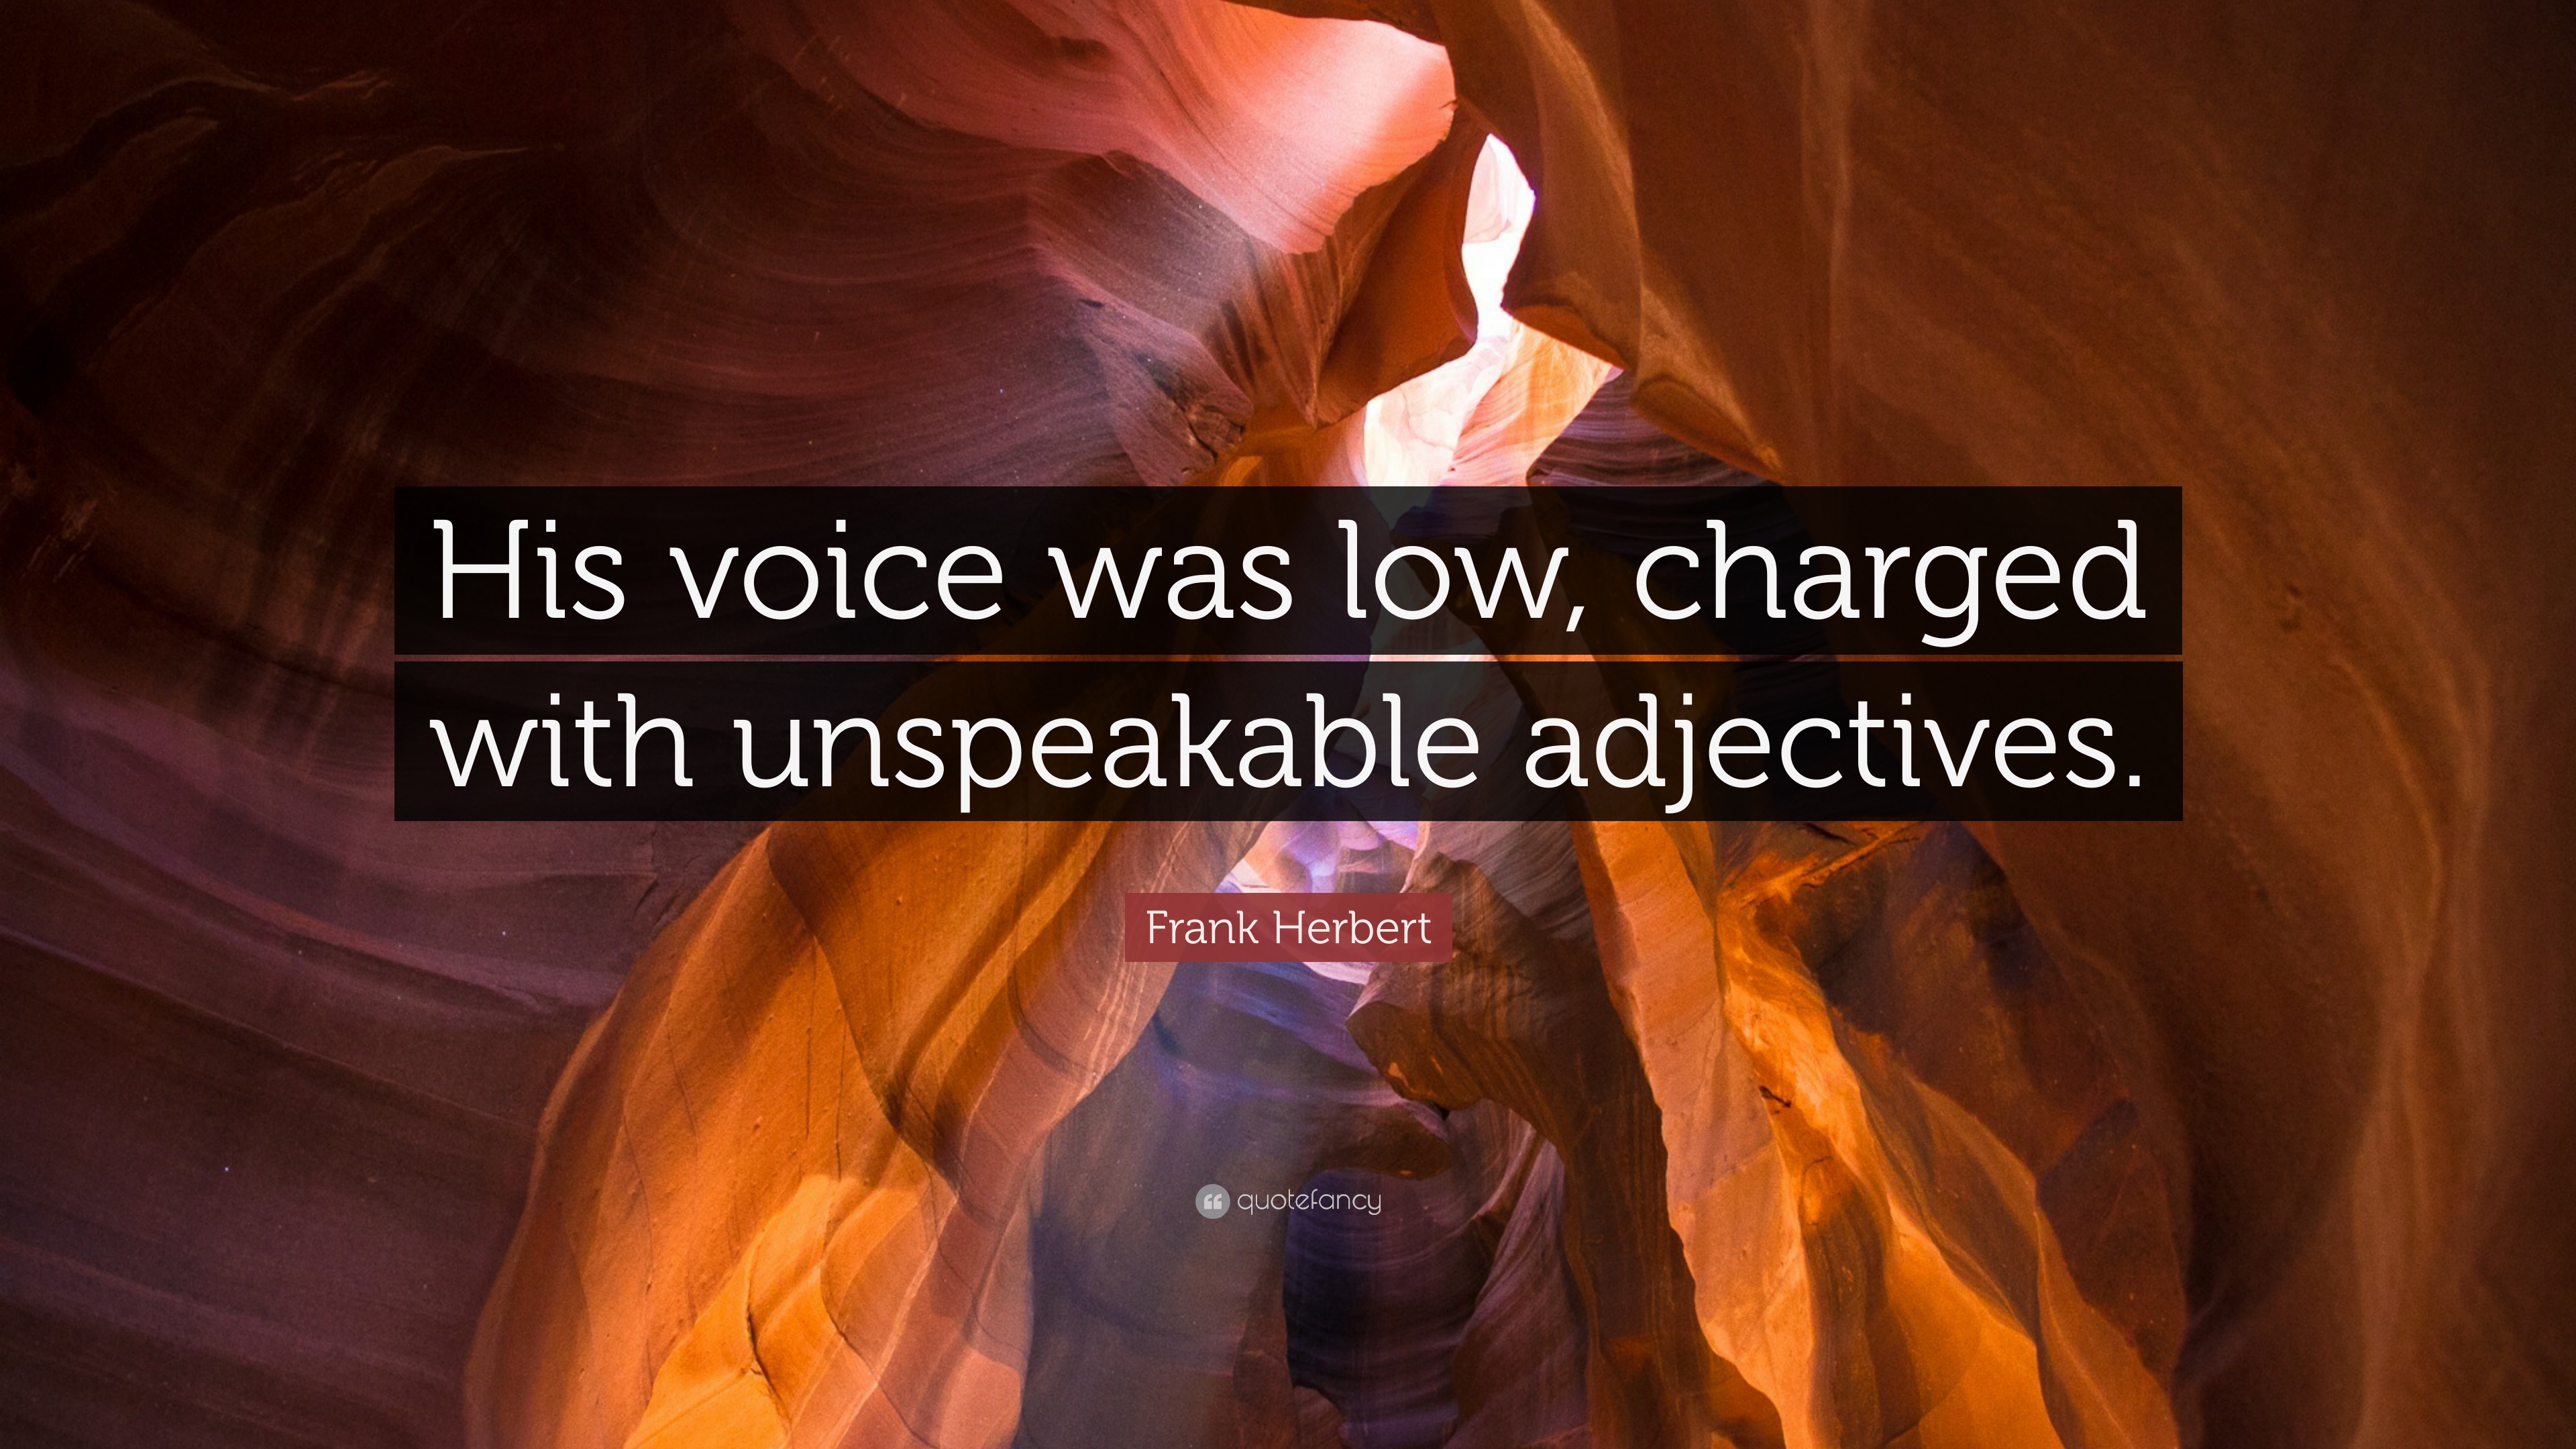 Frank Herbert Quote: “His voice was low, charged with unspeakable